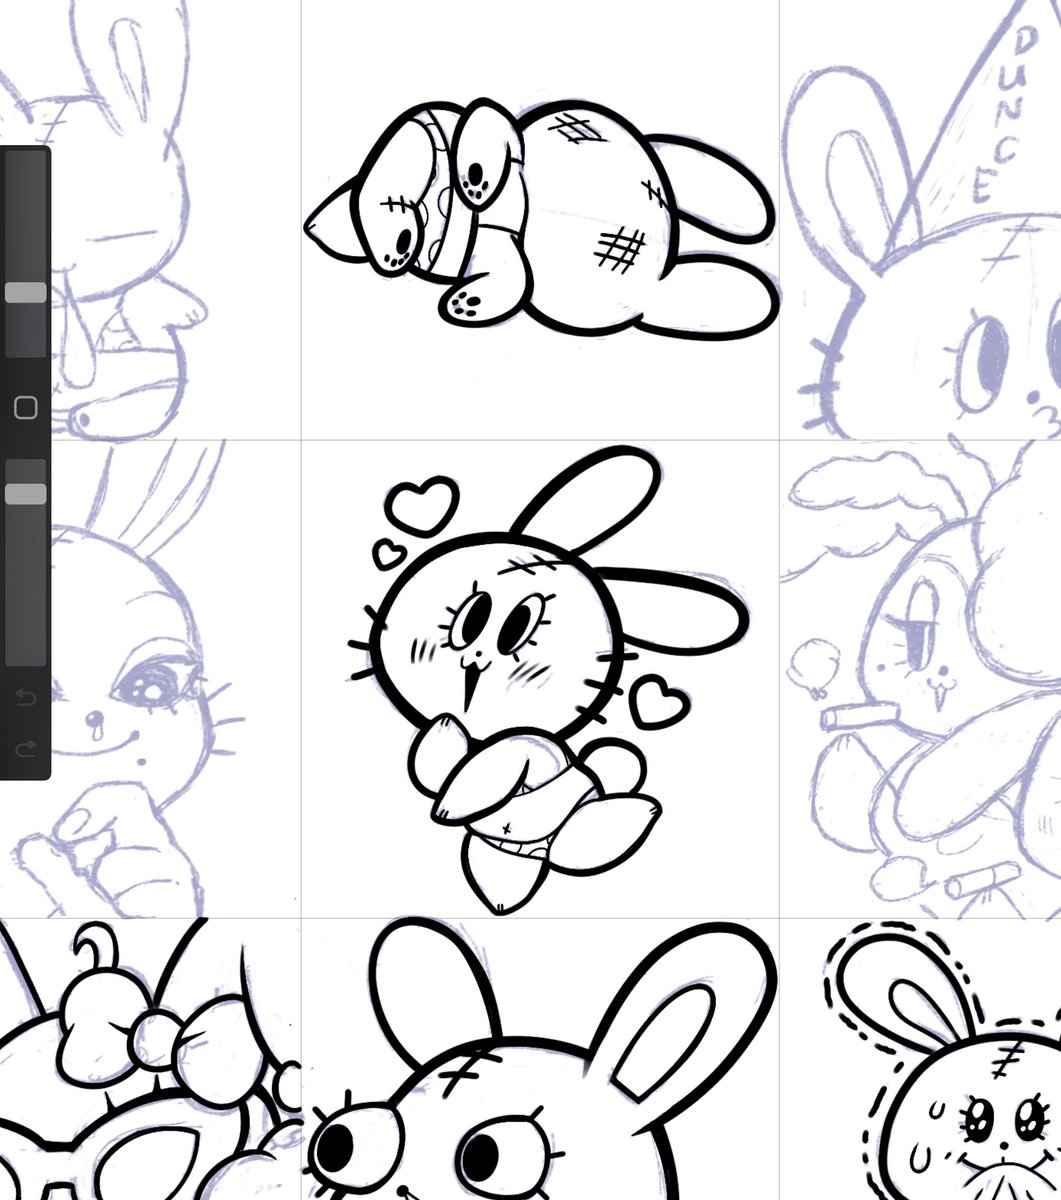 this was gonna be a surprise but since I've been buzzy with work I haven't had time to finish them yet so: here's a peak at some hoochimo emotes I've been working on 👀 